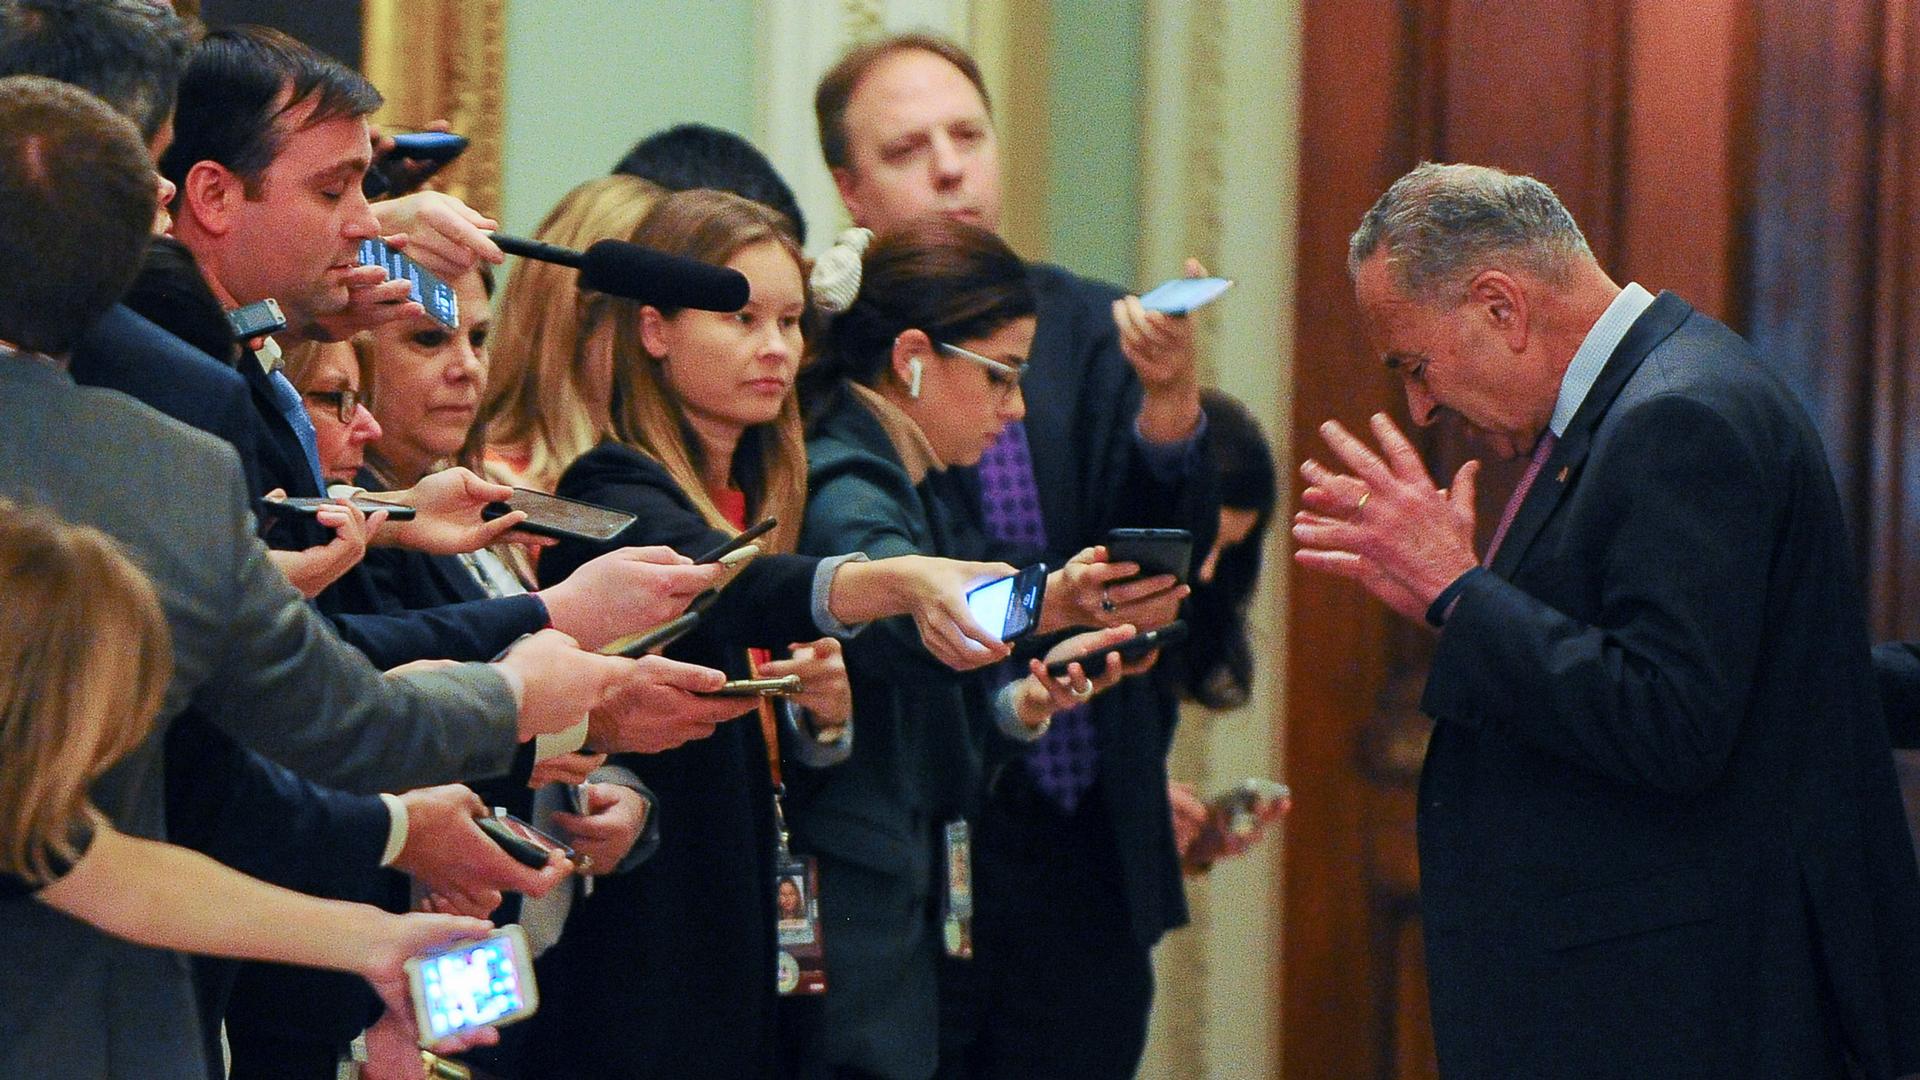 US Senate Minority Leader Chuck Schumer is shown with his hands raised and head down with a row of reporters standing across from him.